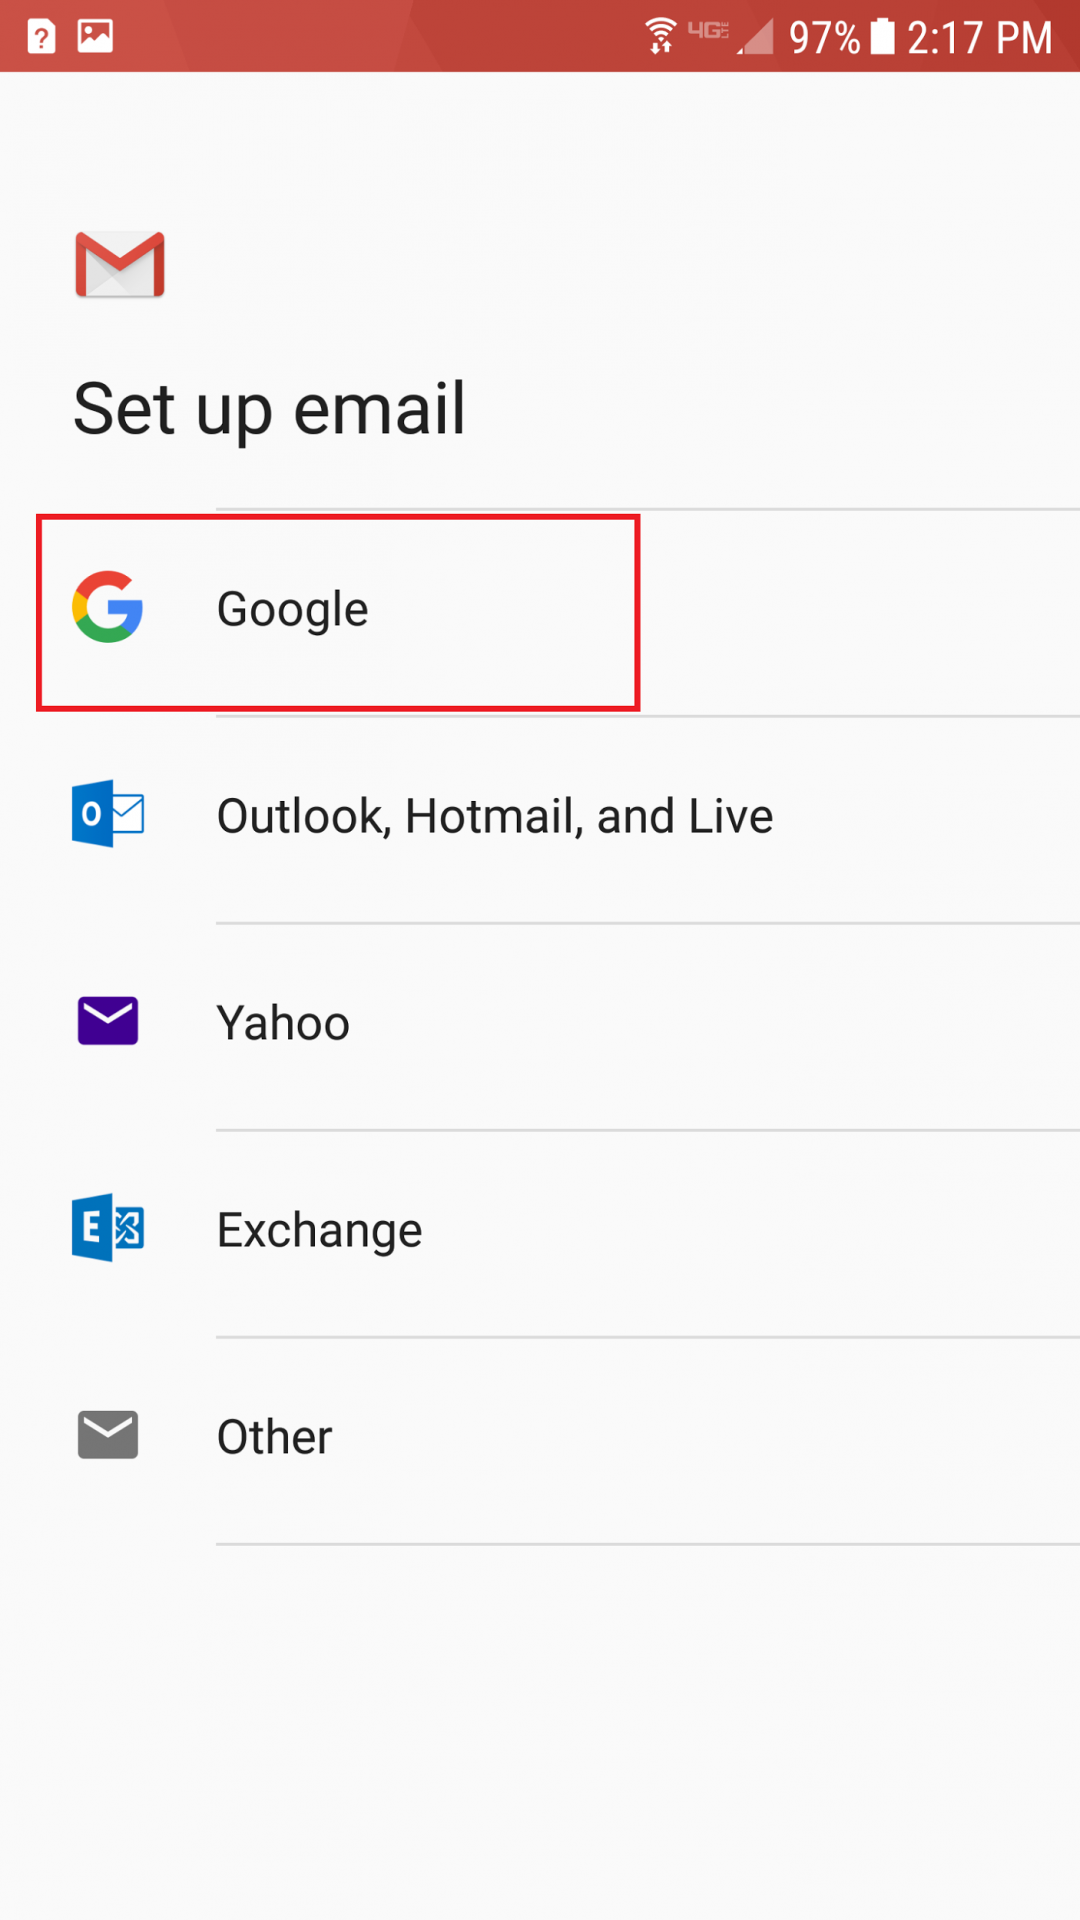 Set up email screen with Google option circled